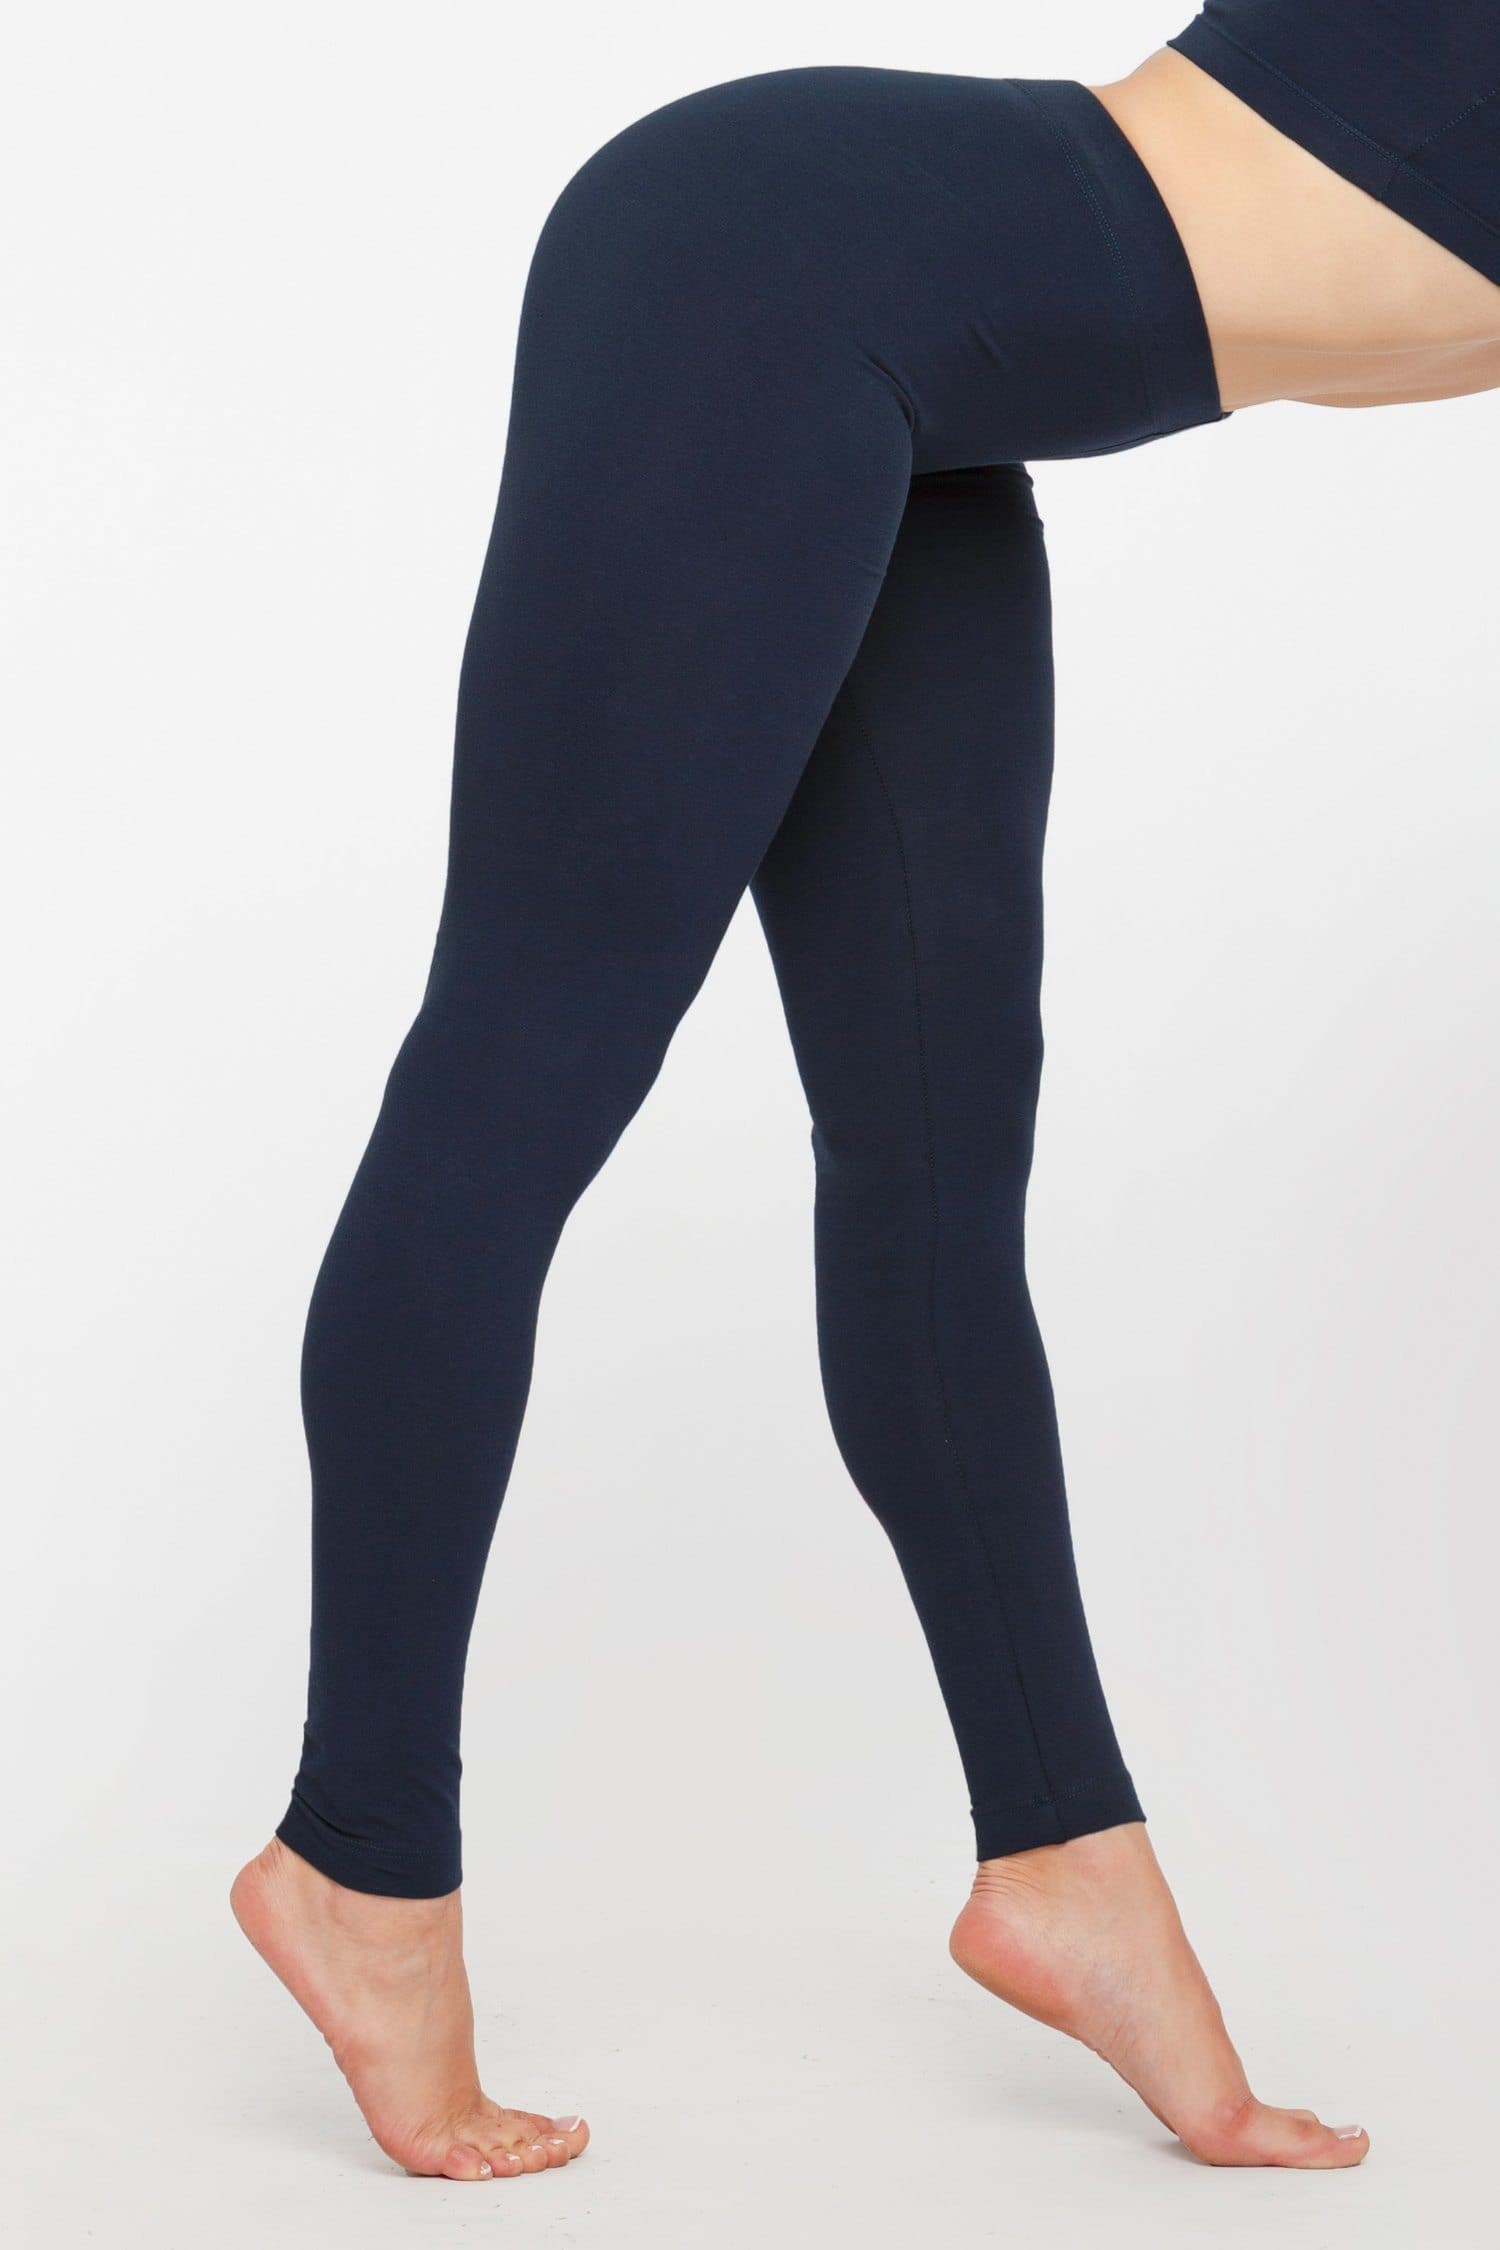 Buy EttelLut Cotton Spandex High Waist Leggings Yoga Pants with Gusseted  Crotch for Women, Navy, Small at Amazon.in